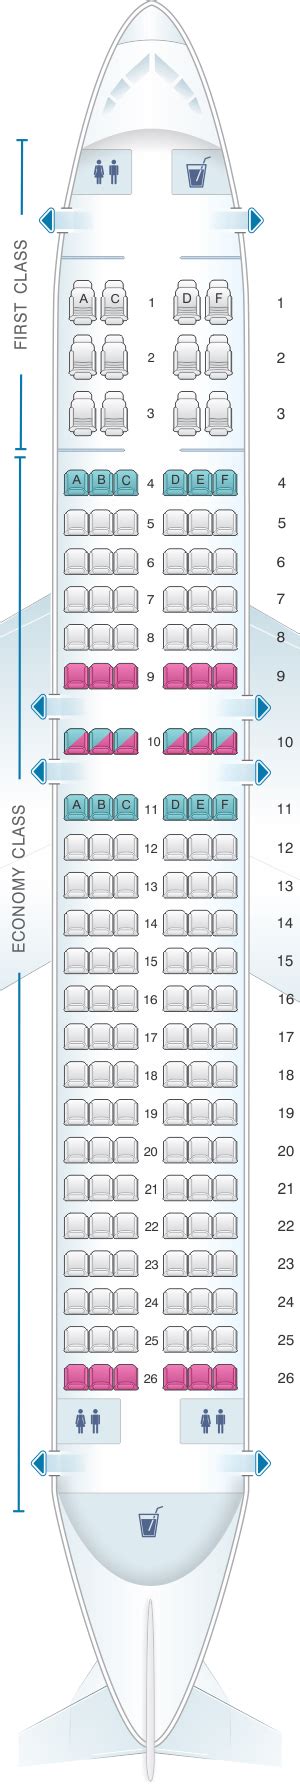 American airlines airbus a320 seat map. American Airlines Seat Maps. Overview. Planes & Seat Maps. Airbus A319 (319) Airbus A320 (320) Airbus A321 (321) Layout 1. Airbus A321 (321) Layout 2. Airbus A321 (32B) Layout 3. Airbus A321neo ACF. 